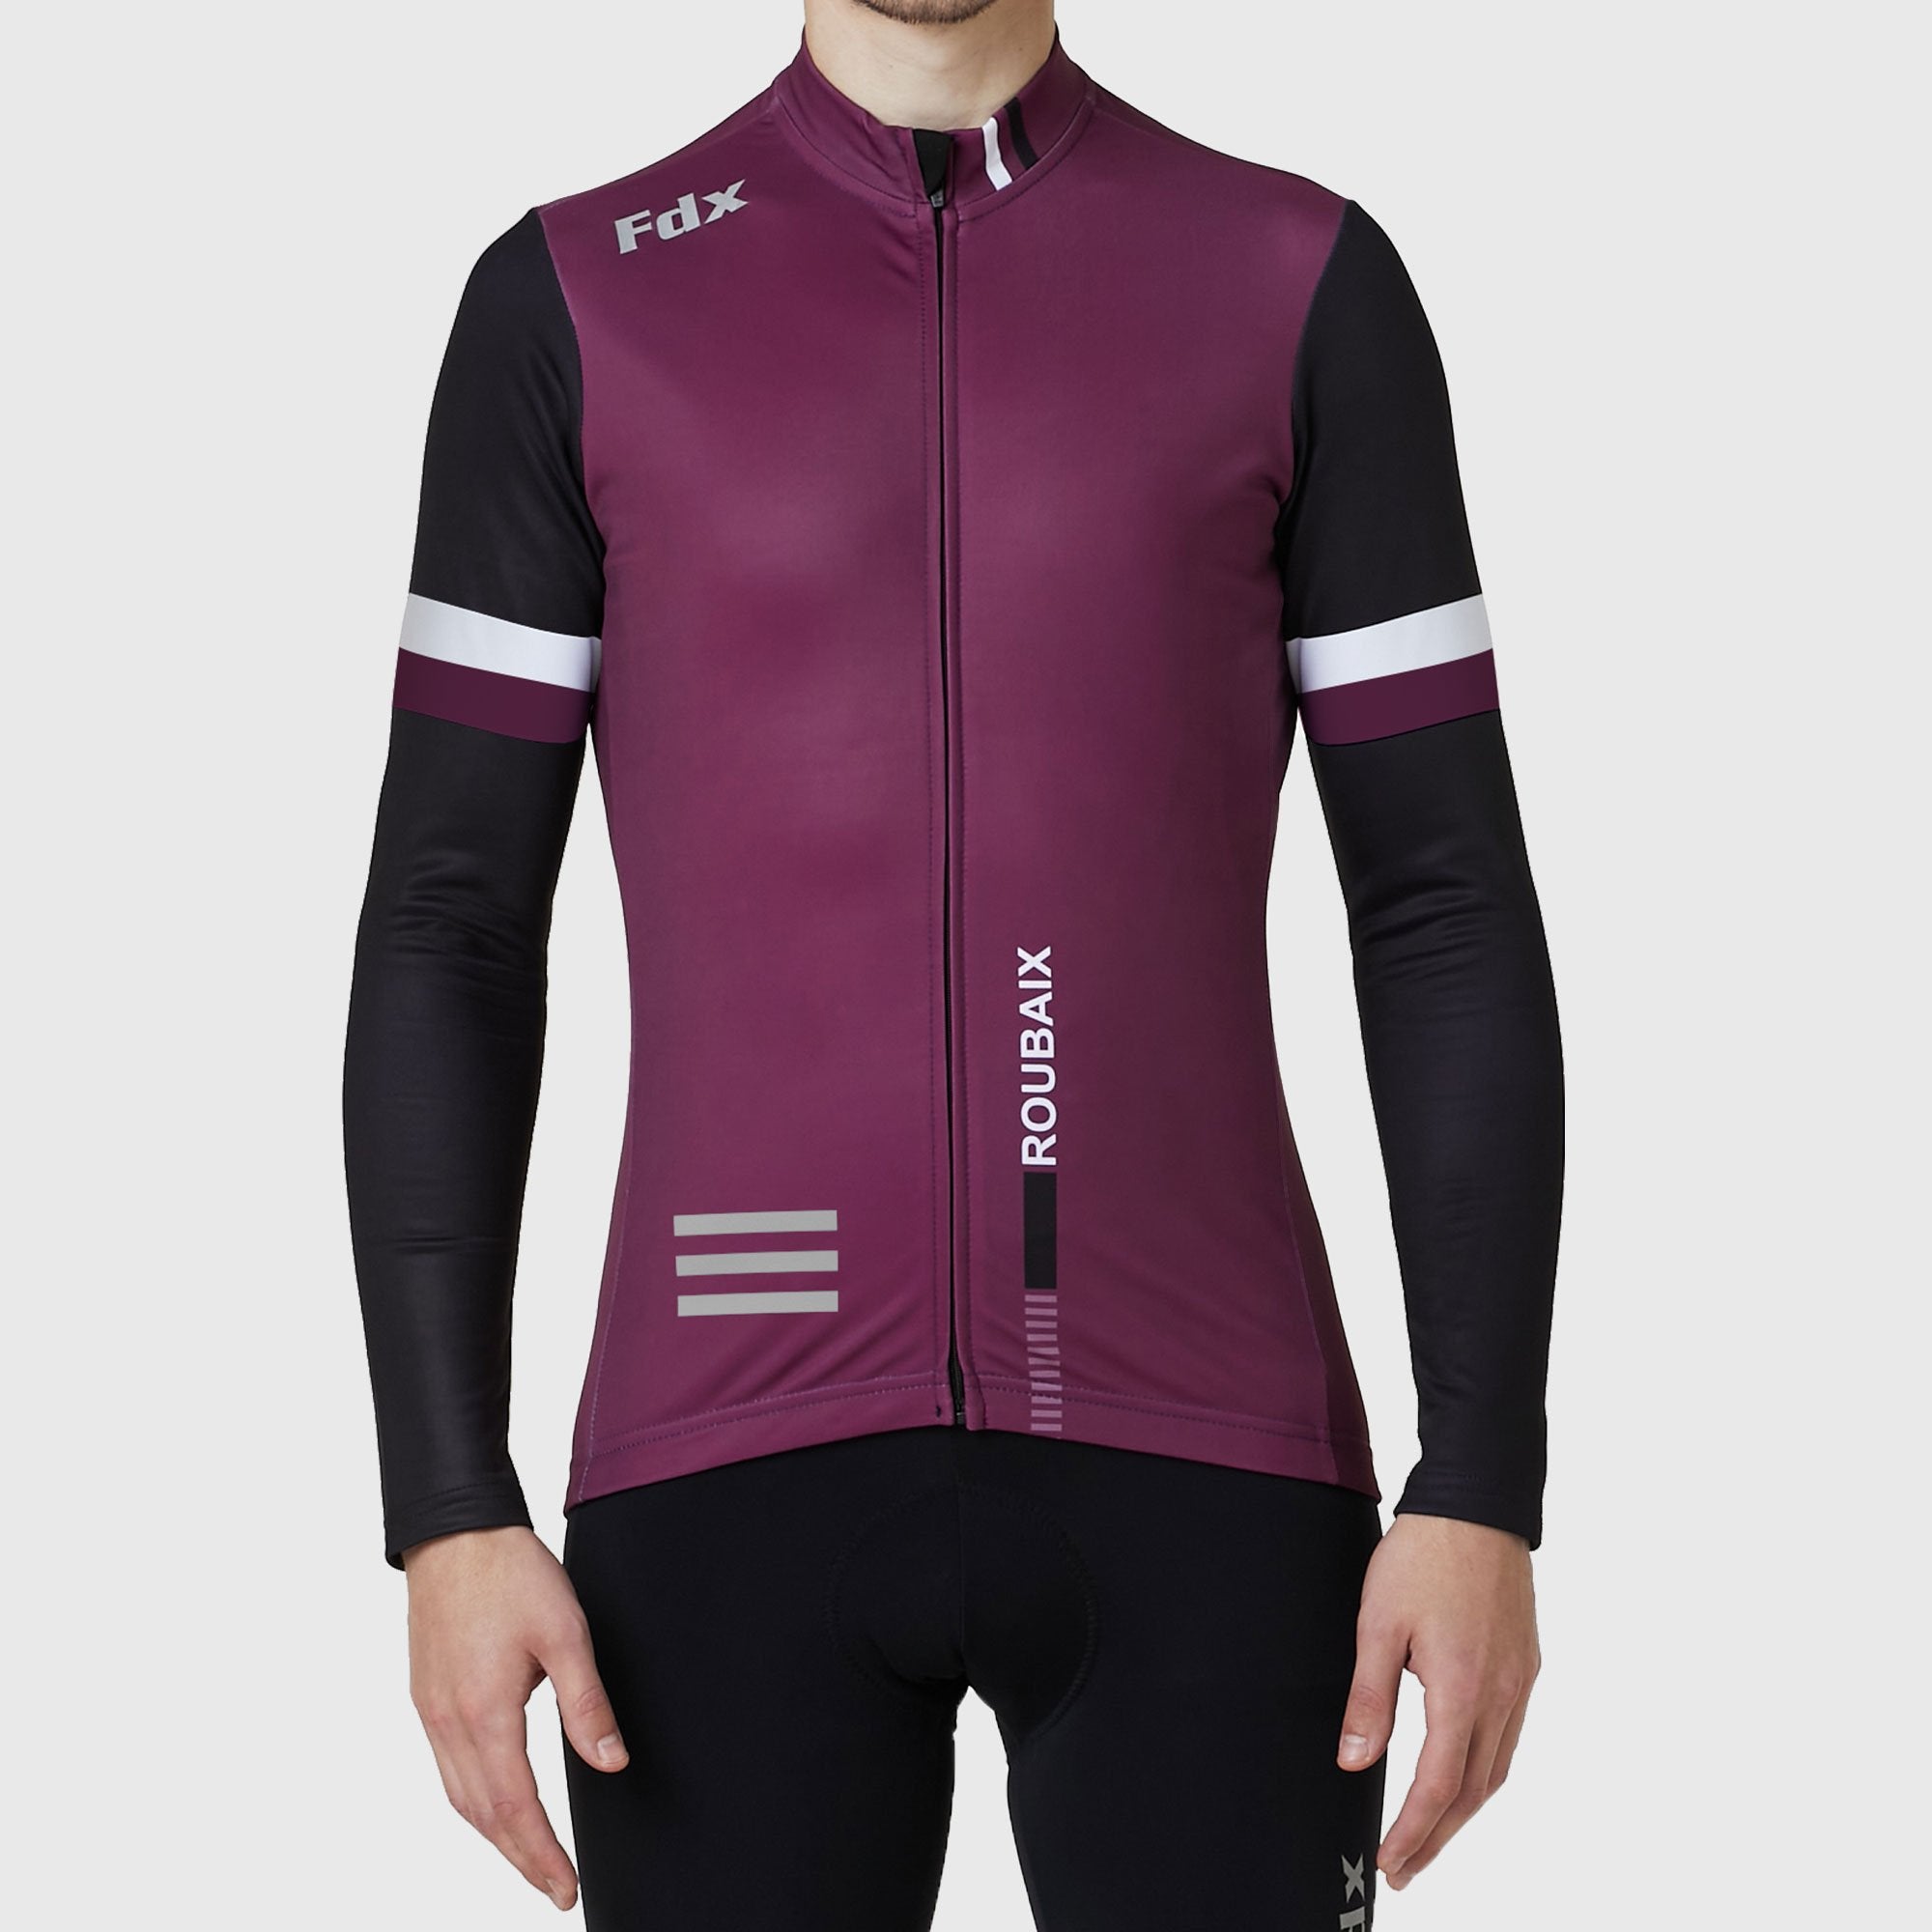 Fdx Limited Edition Men's Purple Thermal Roubaix Long Sleeve Cycling Jersey